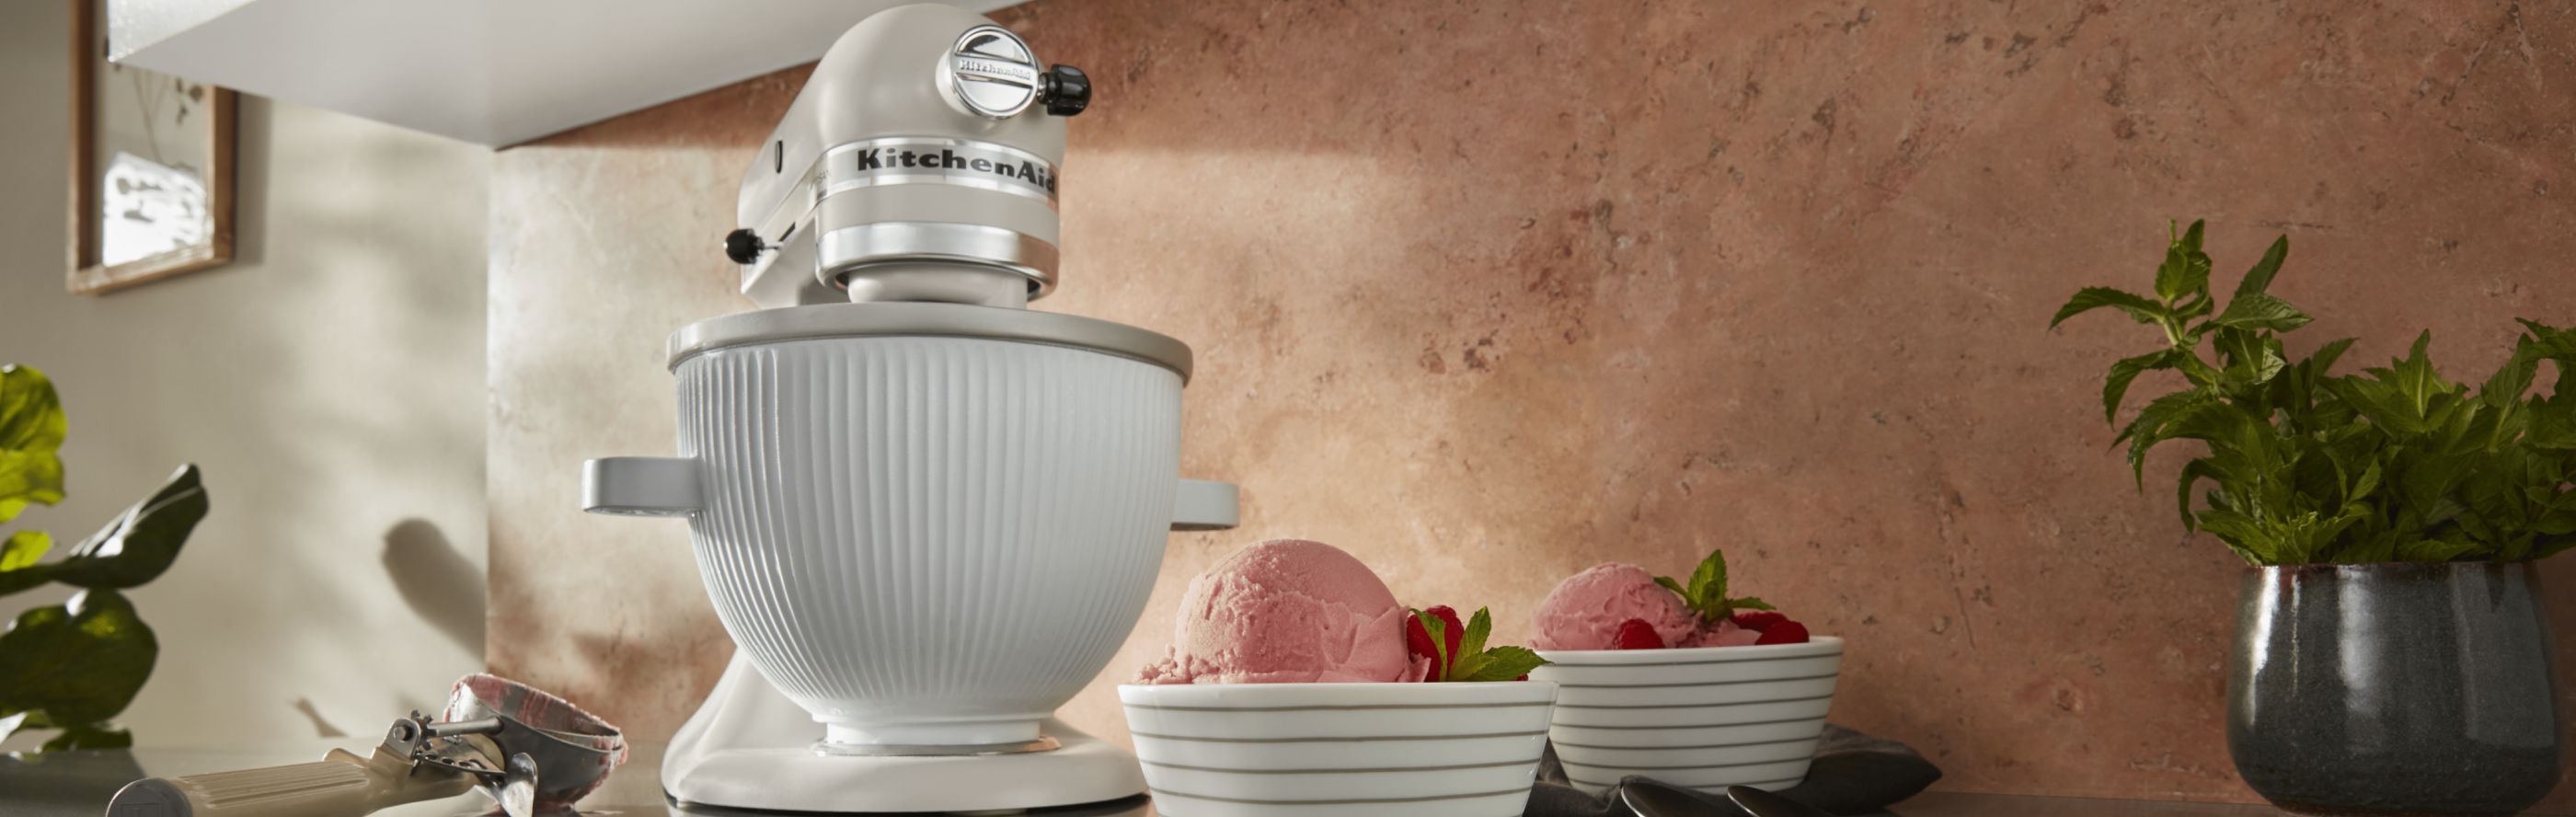 White KitchenAid® stand mixer with ice cream maker attachment next to bowls of strawberry ice cream